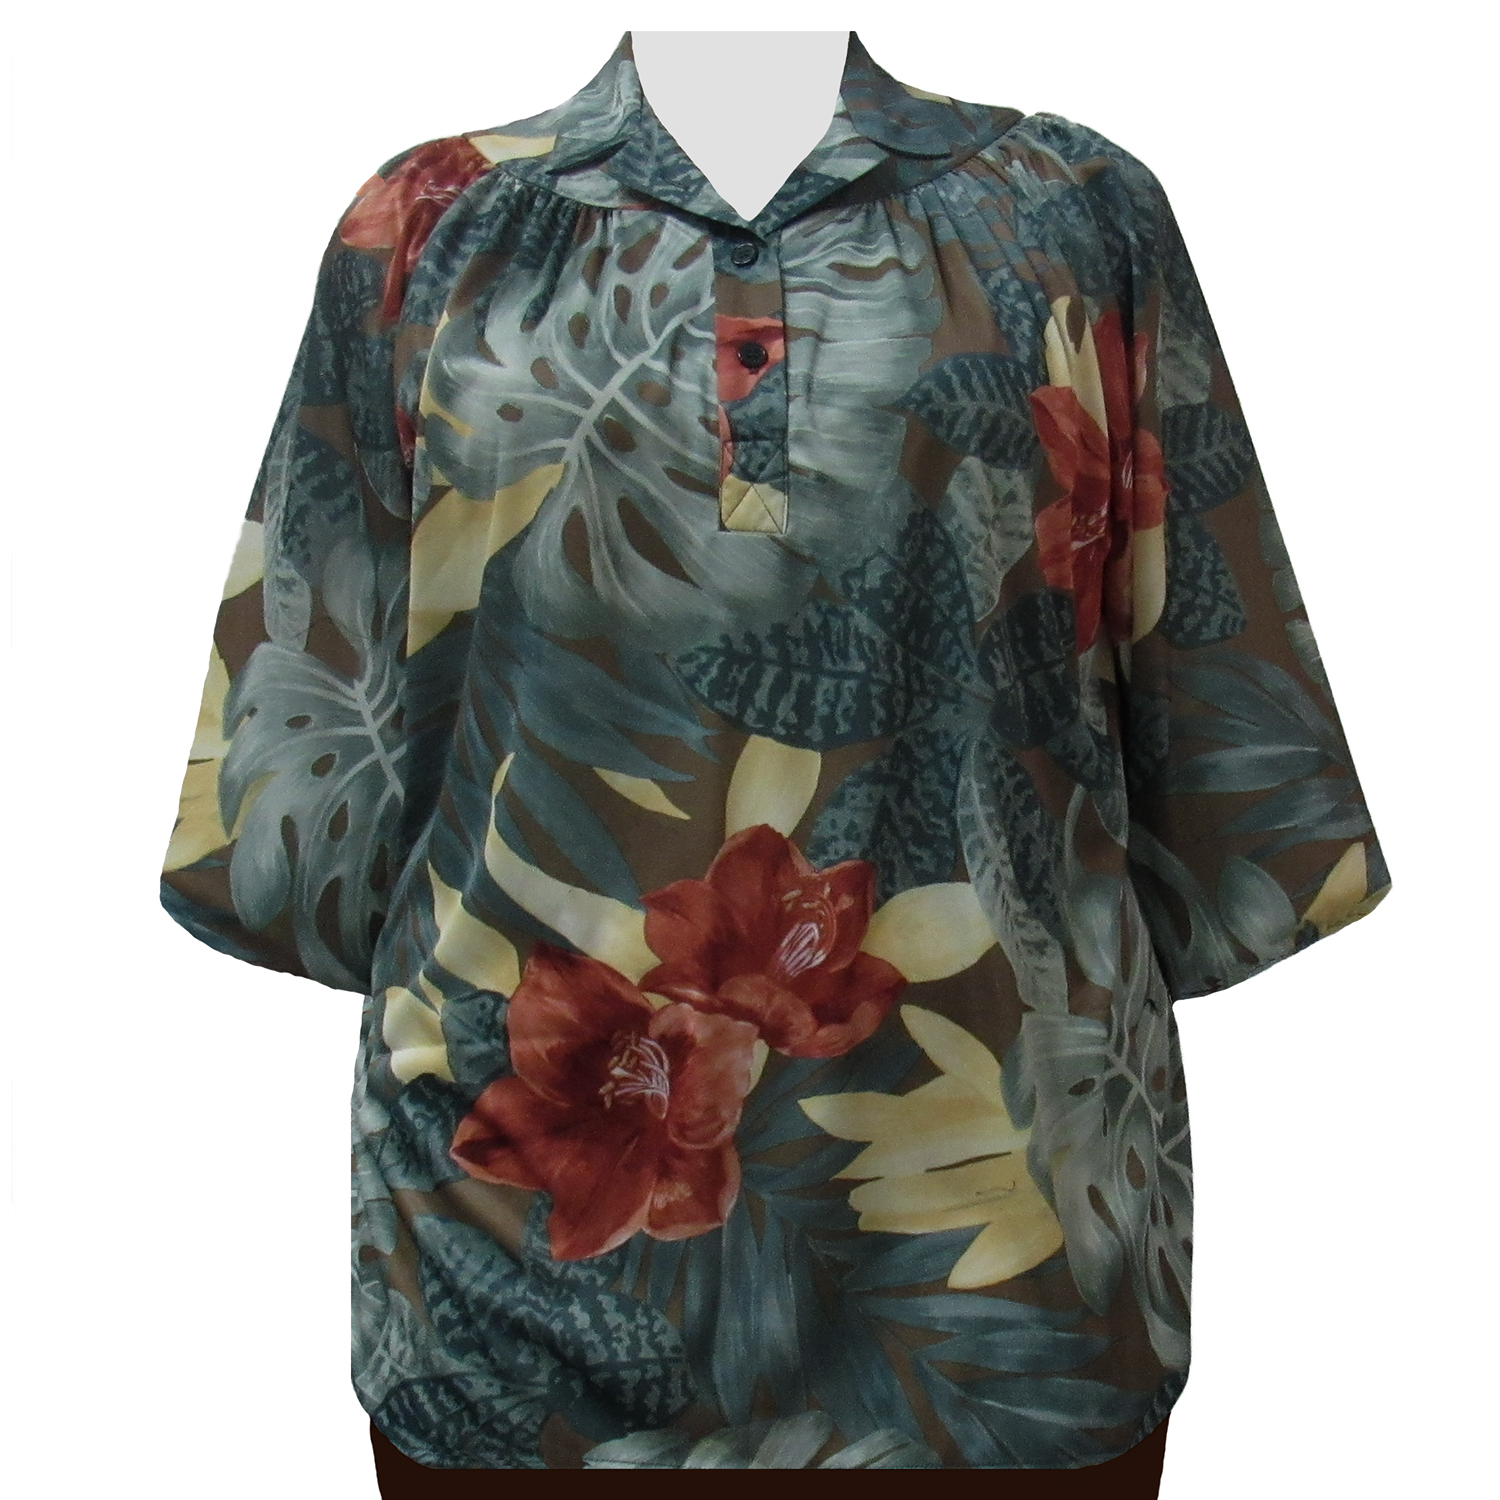 A Personal Touch Sage Tropical Women's Plus Size Top